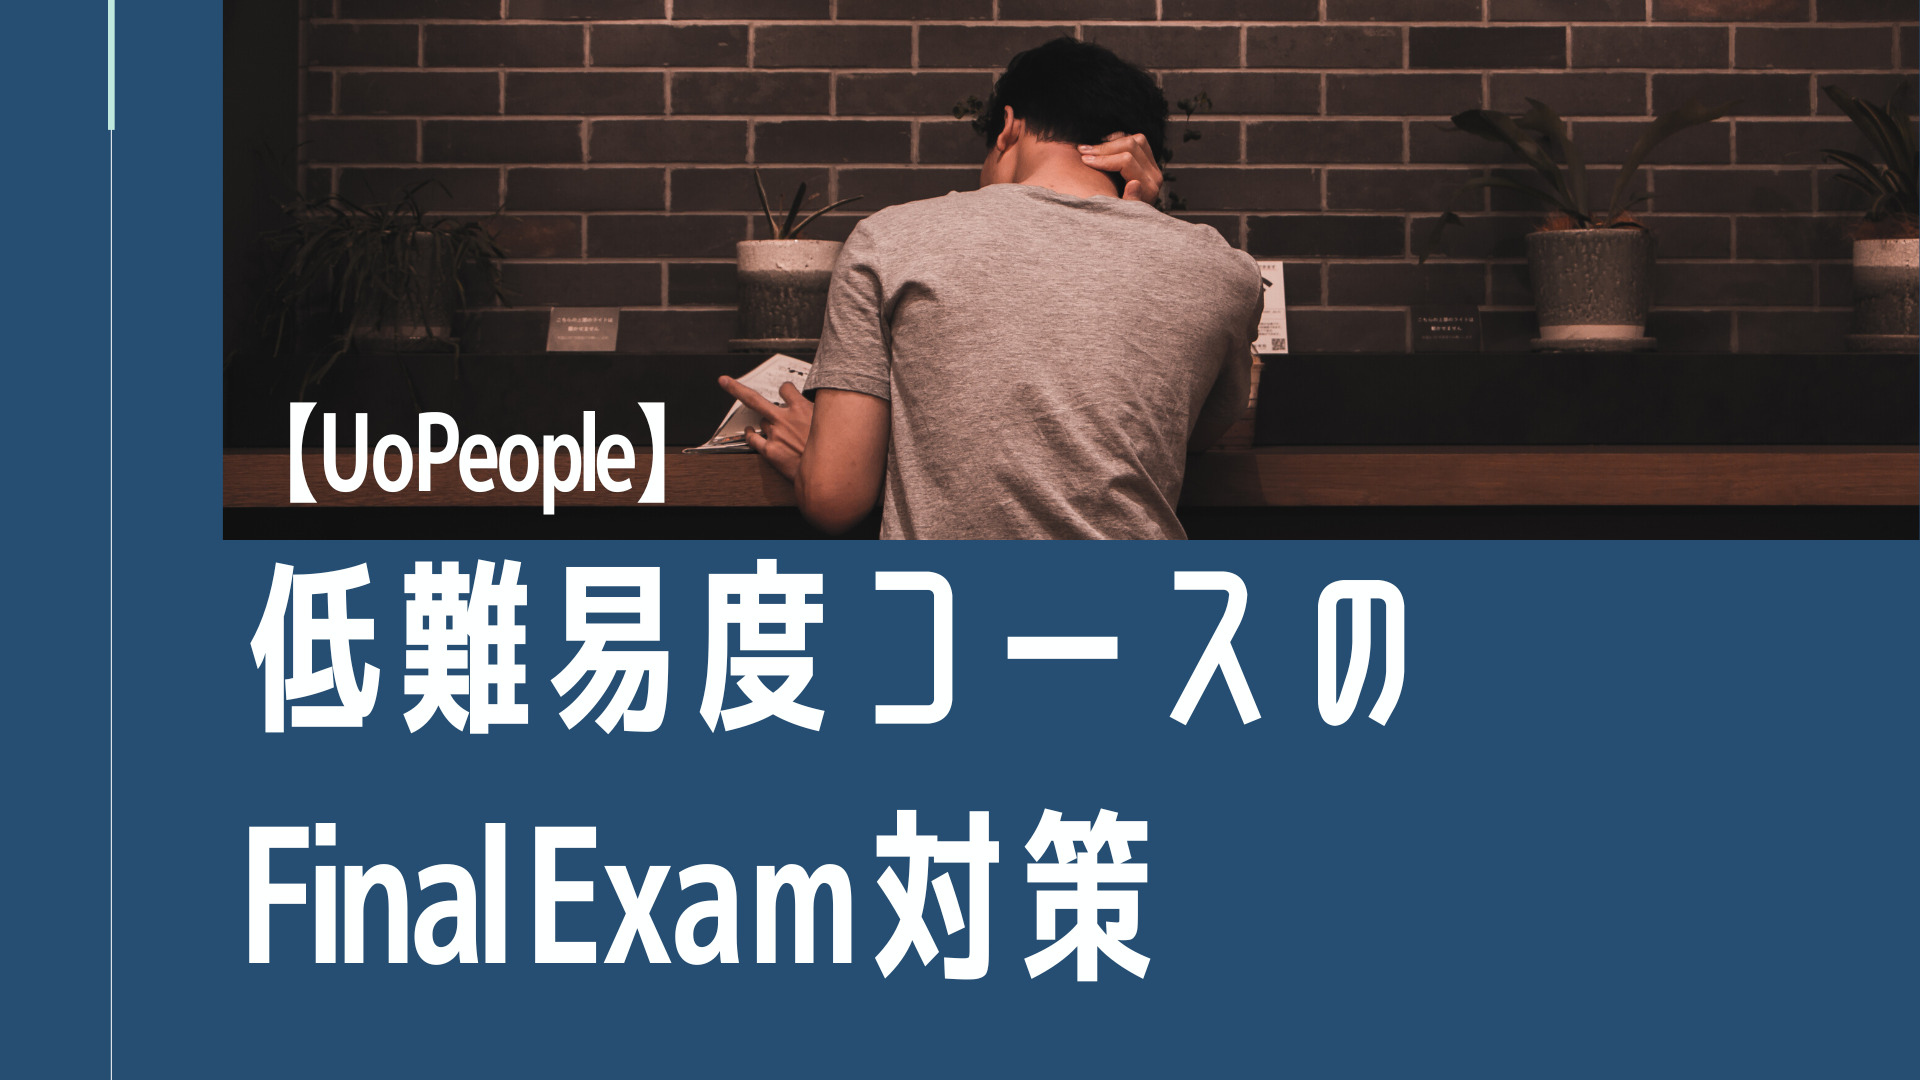 UoPeople Final Exam 対策